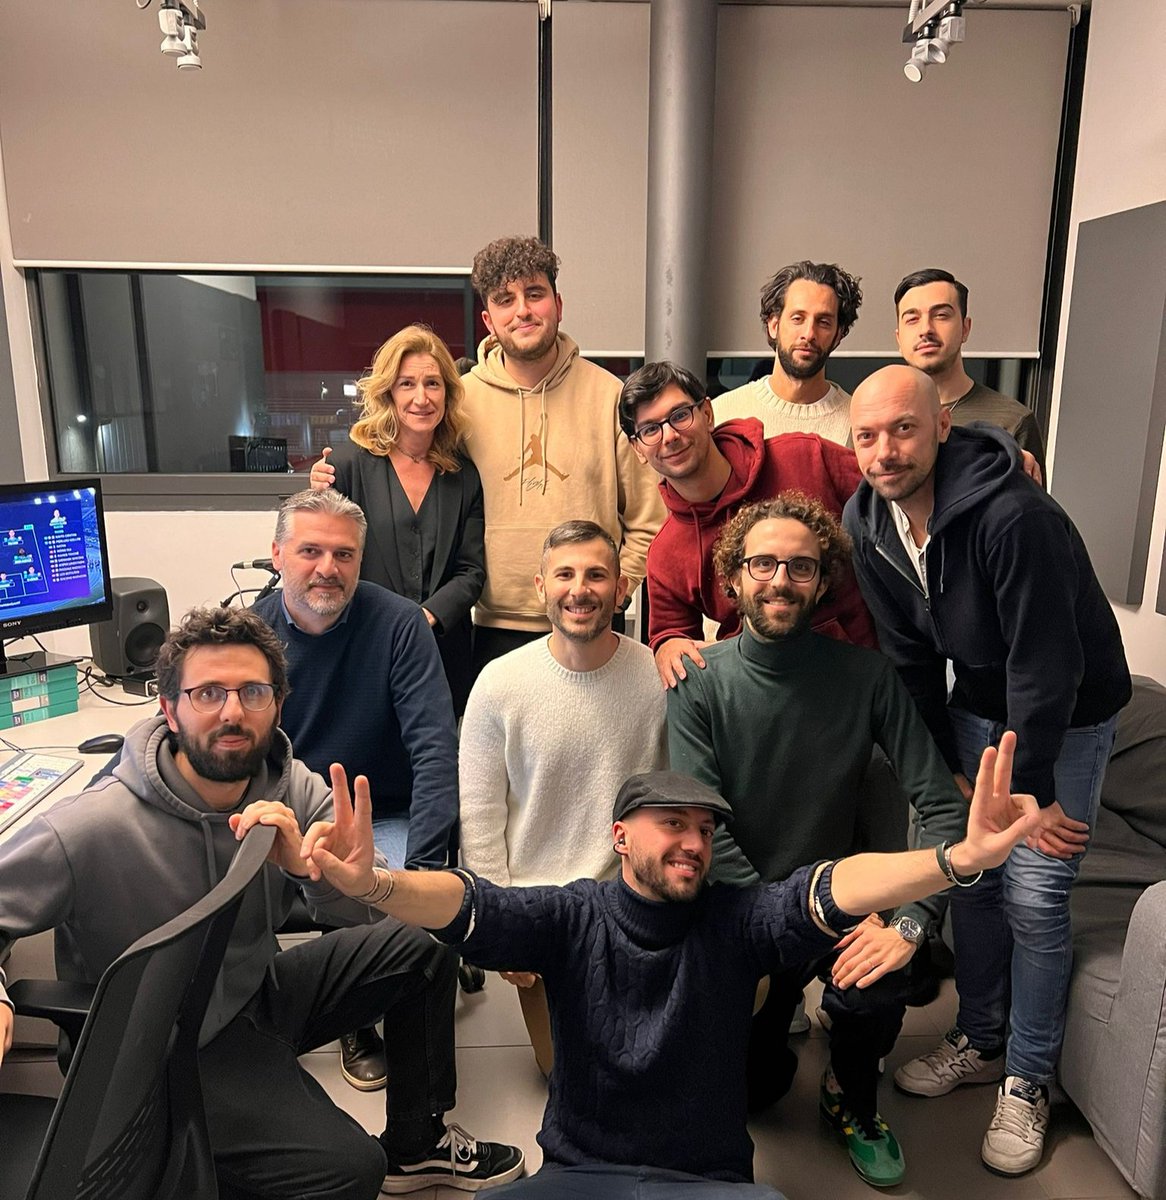 Behind the scenes ⚽ As well as broadcasting Napoli v Barcelona, our brilliant team delivered their usual VOD highlights package. They've already delivered 200+ highlights and in-play videos so far this season, and there are sure to be more twists and turns to come 🙌